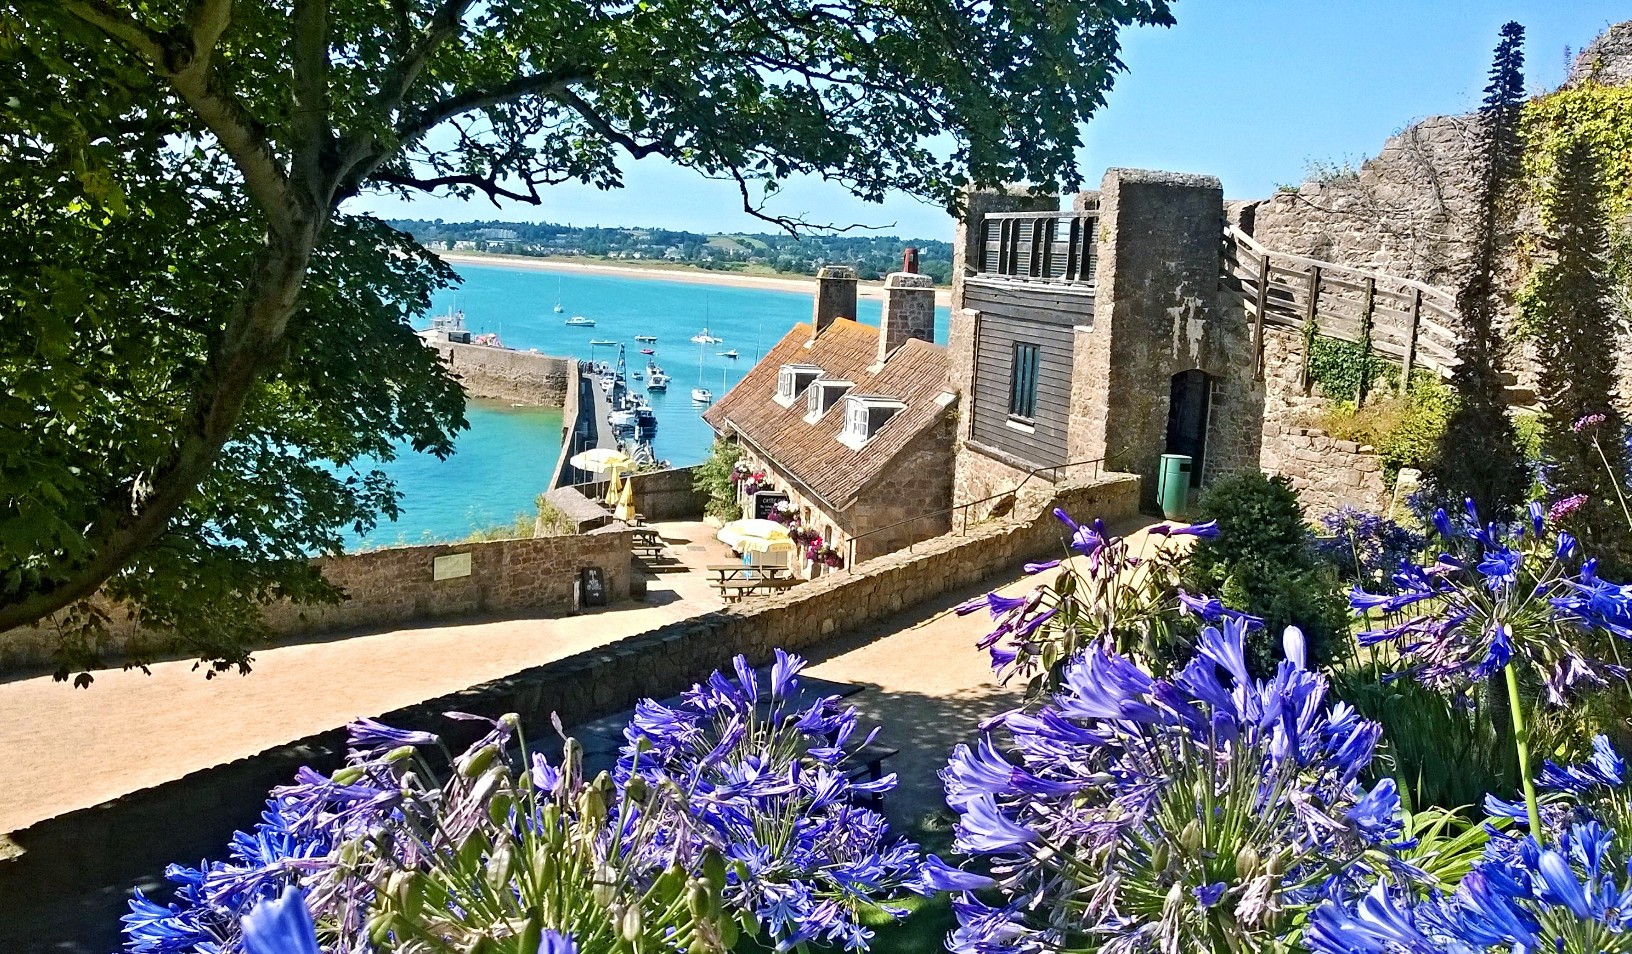 Jersey Island – Where Sunshine And Tranquility Is Only An Hour Away